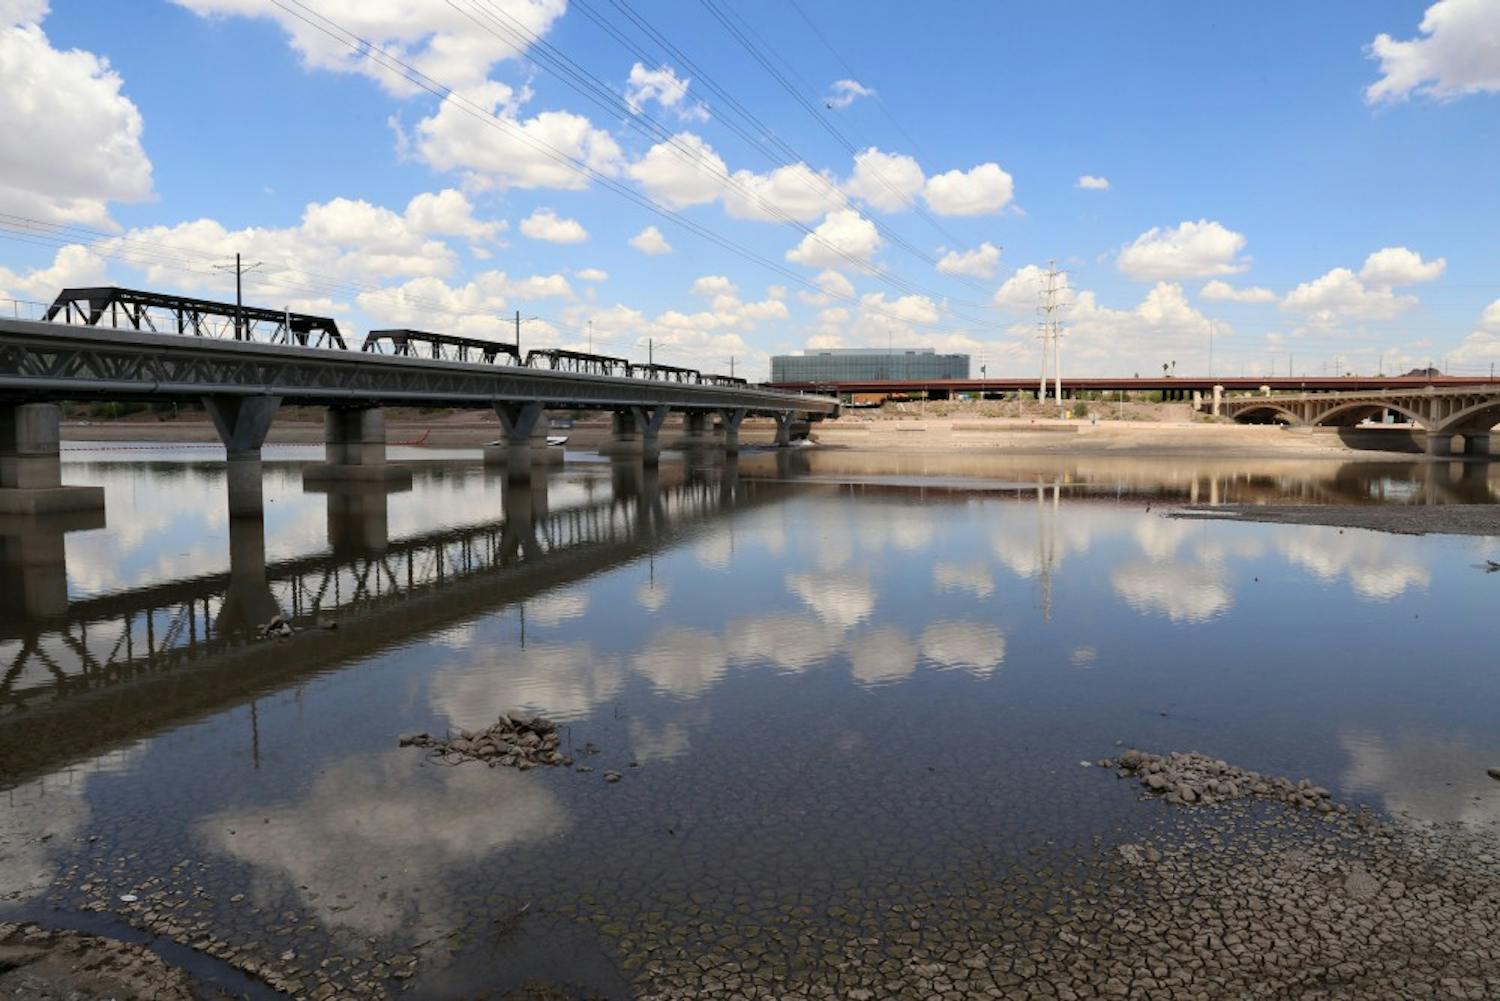 Process to Refill Tempe Town Lake Begins